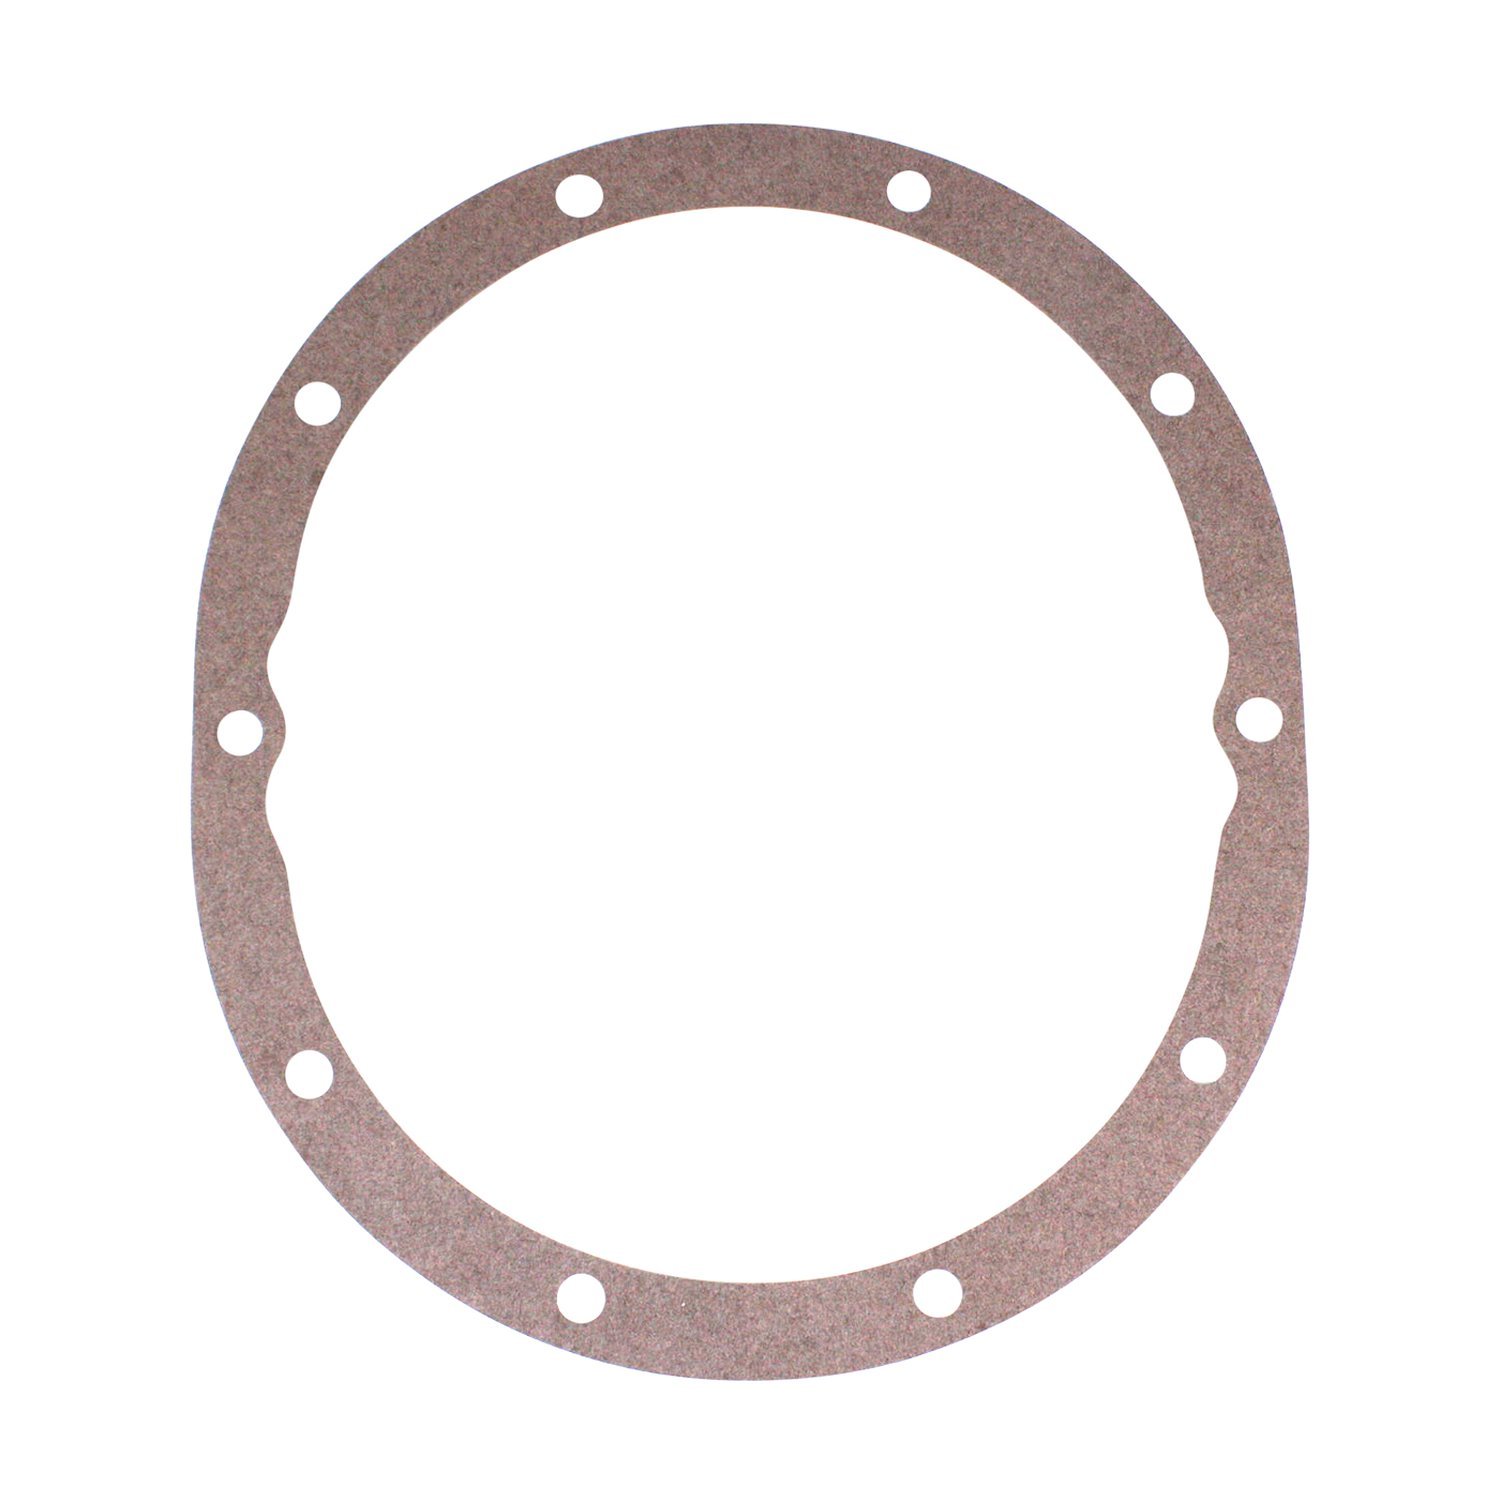 Differential Cover Gasket Fits 1955-1964 Chevrolet El Camino